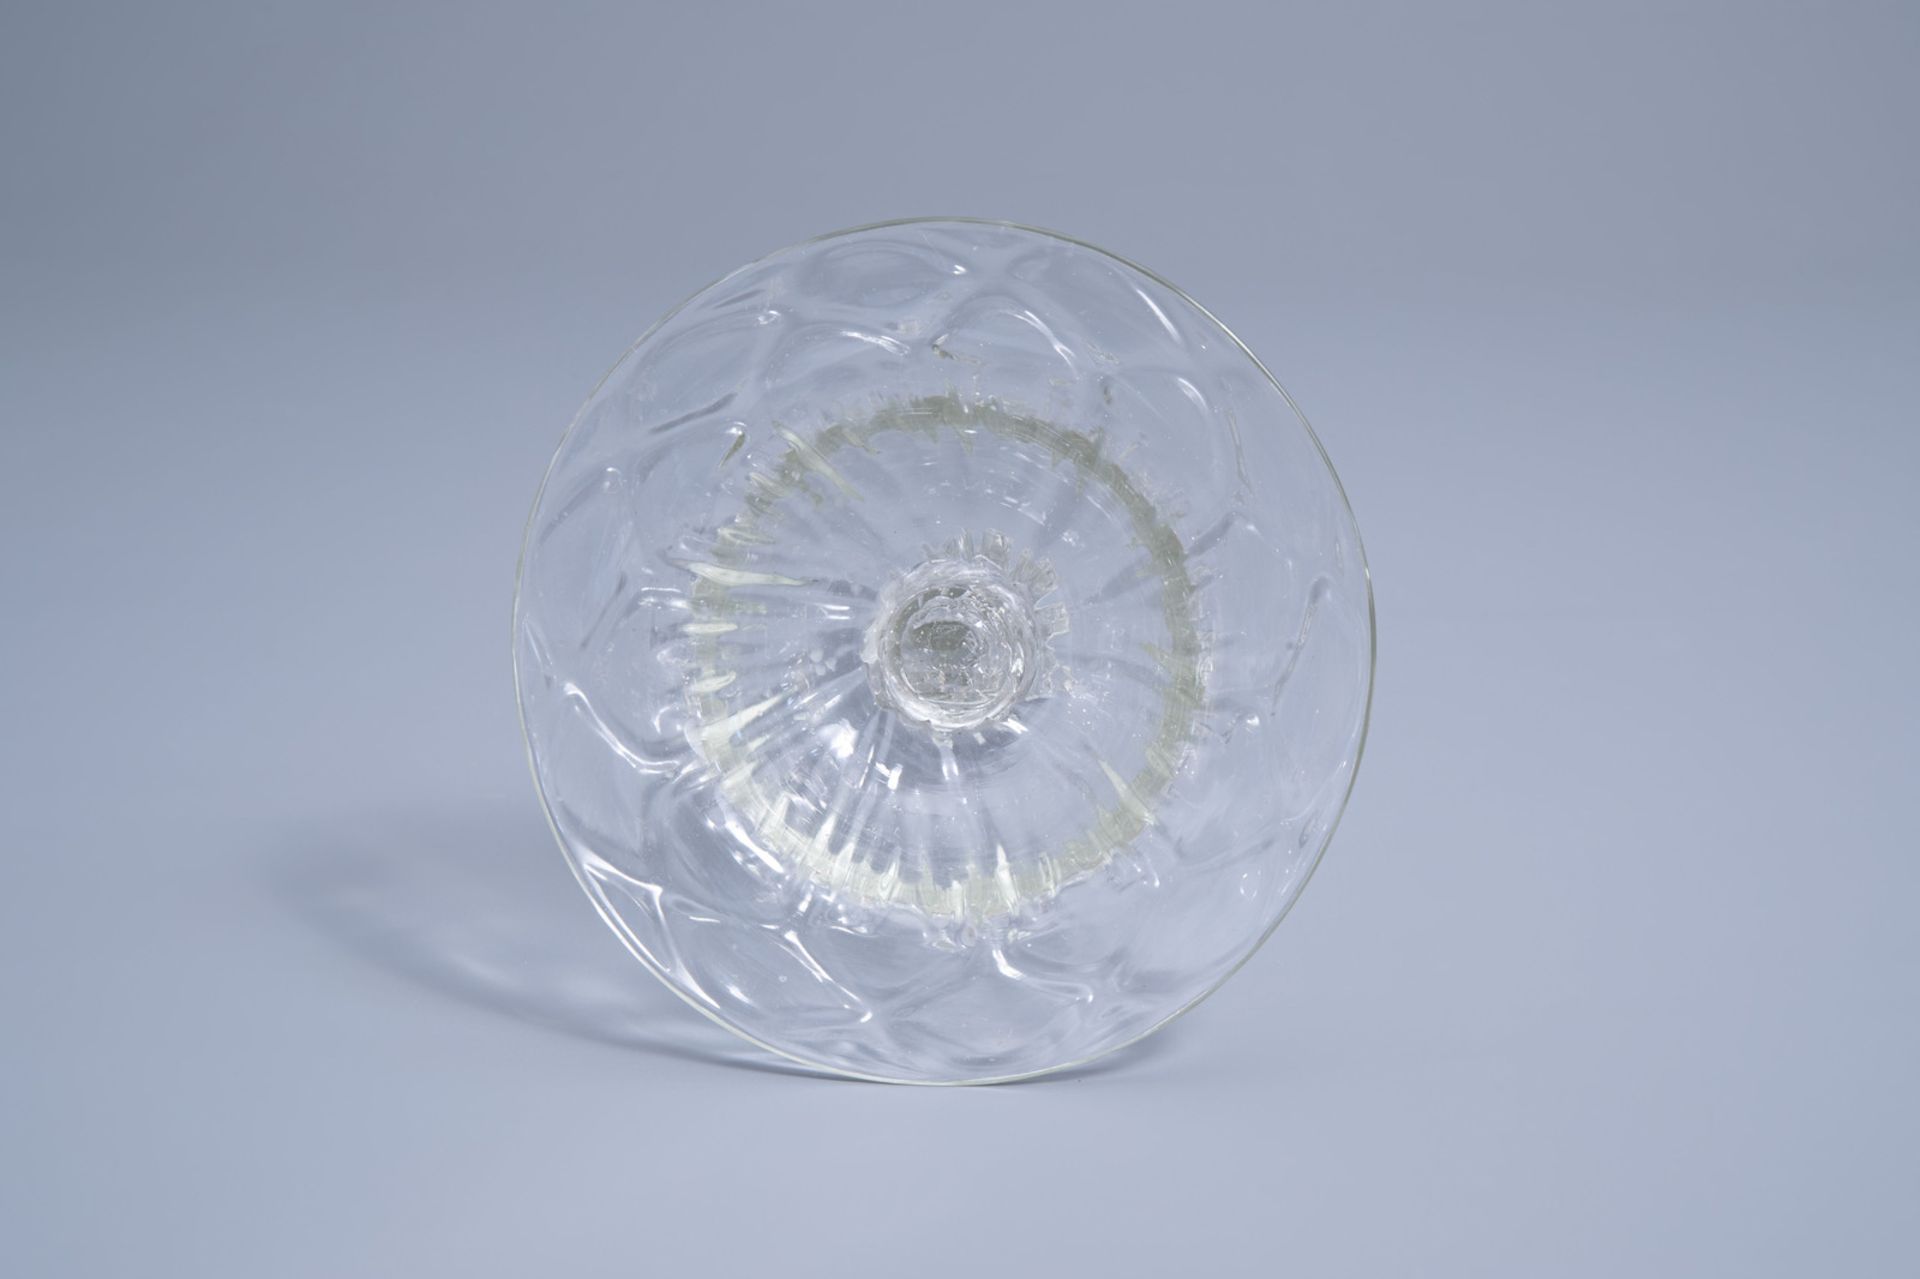 A mouth-blown glass candlestick with a moulded eight-sided pedestal stem, possibly Lige, 18th C. - Image 7 of 7